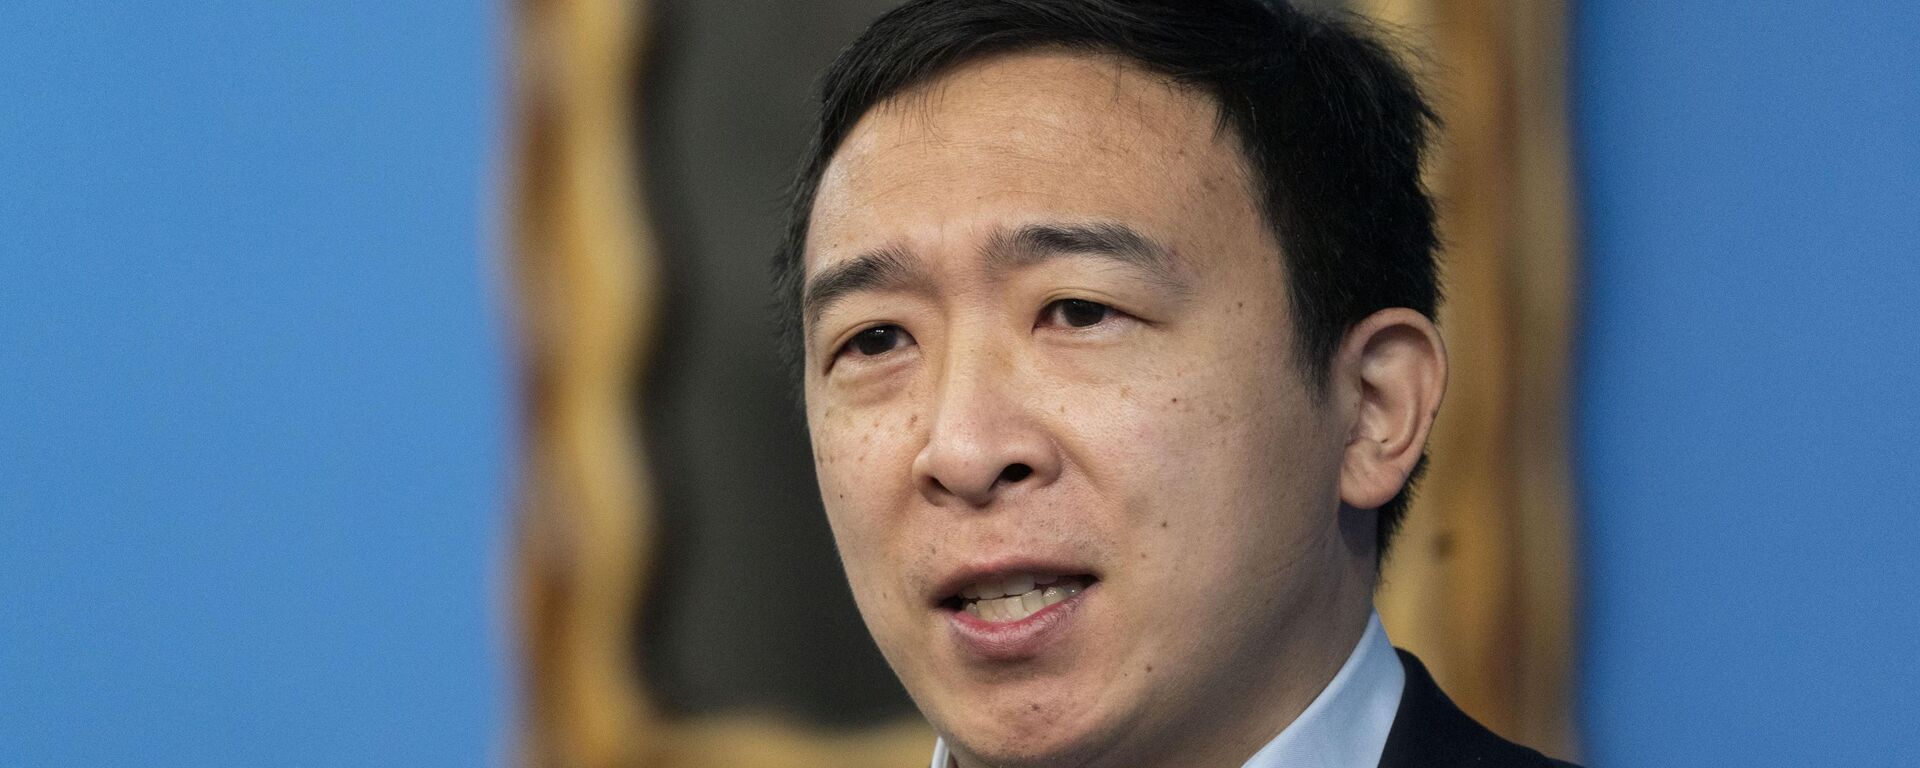 FILE - In this March 18, 2021, file photo, Andrew Yang, a New York City Democratic mayoral candidate, speaks at the National Action Network in New York. Yang has drawn social media scorn after saying his favorite subway station was in tourist-heavy Times Square. - Sputnik International, 1920, 27.05.2021